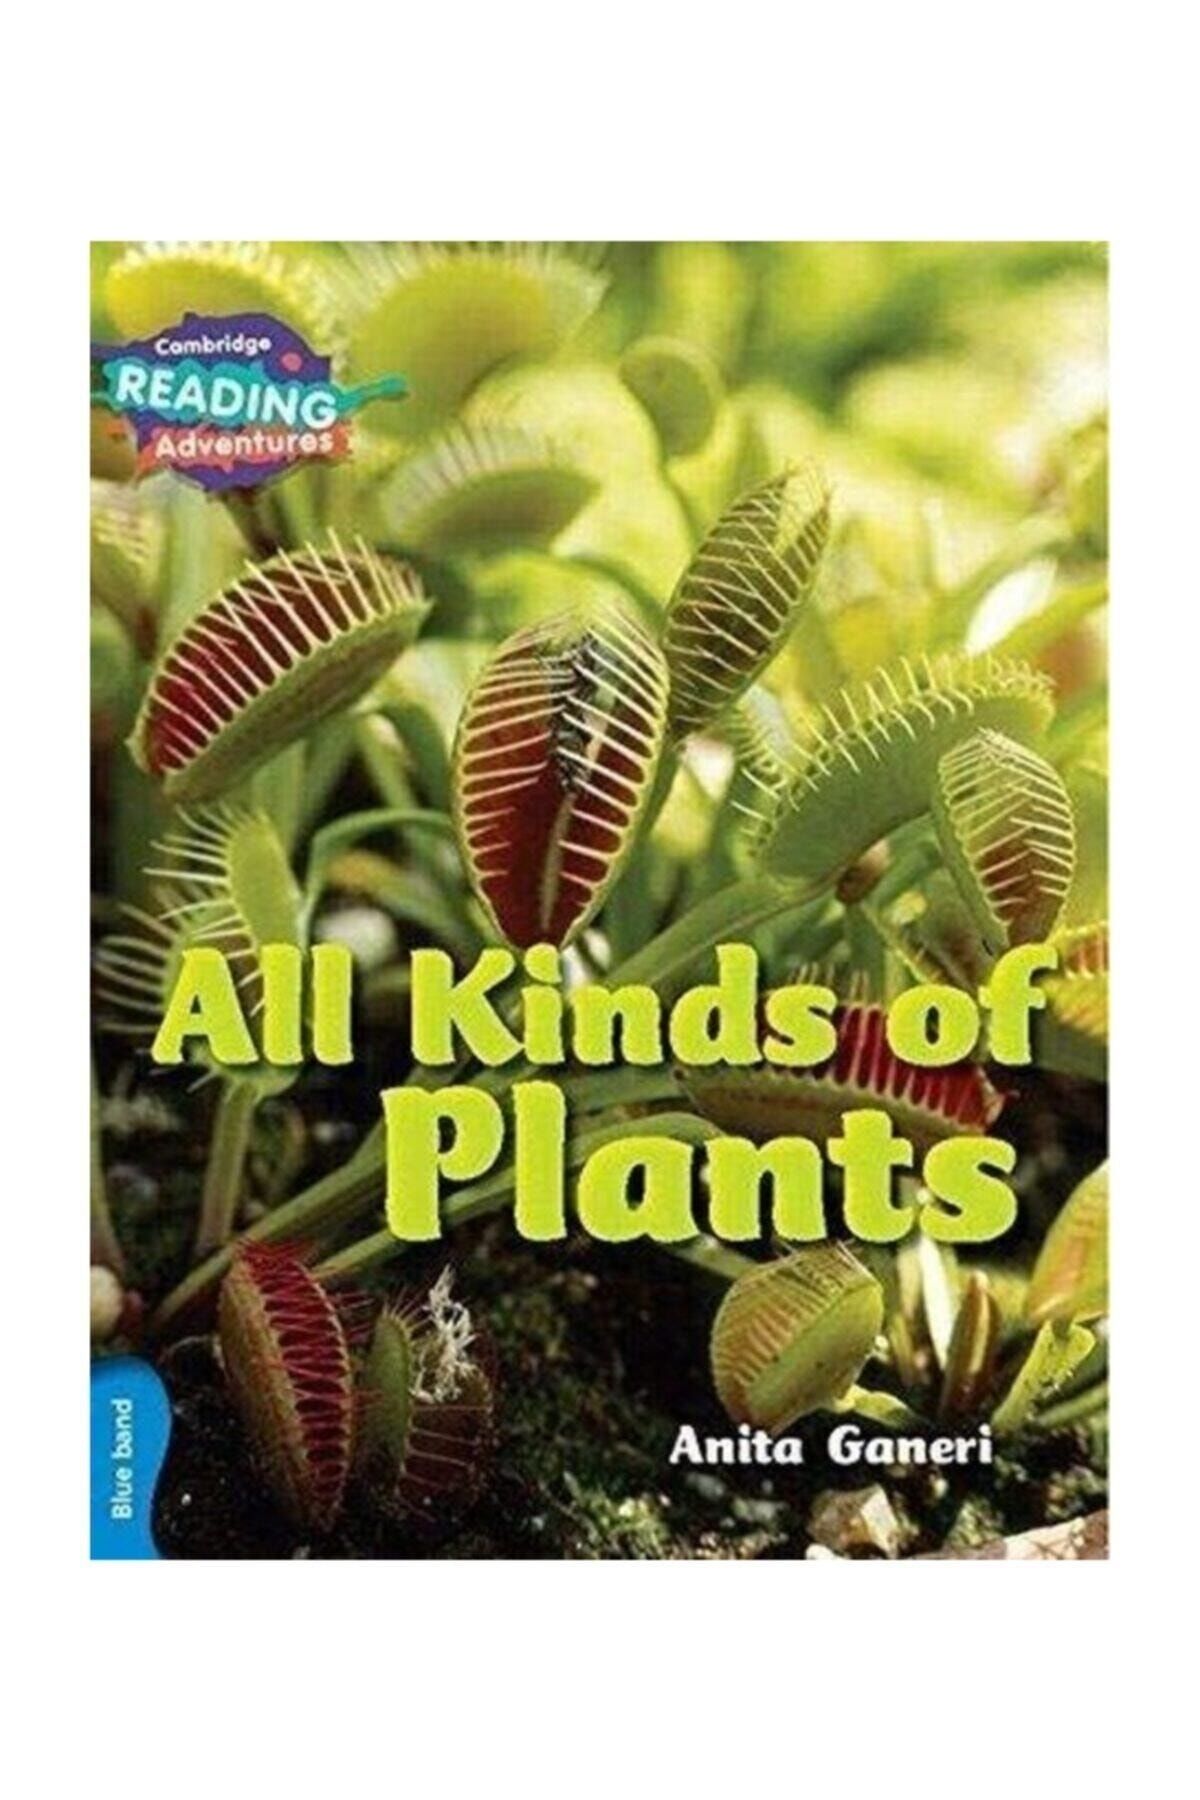 Cambridge University Blue Band- All Kinds Of Plants Reading Adventures